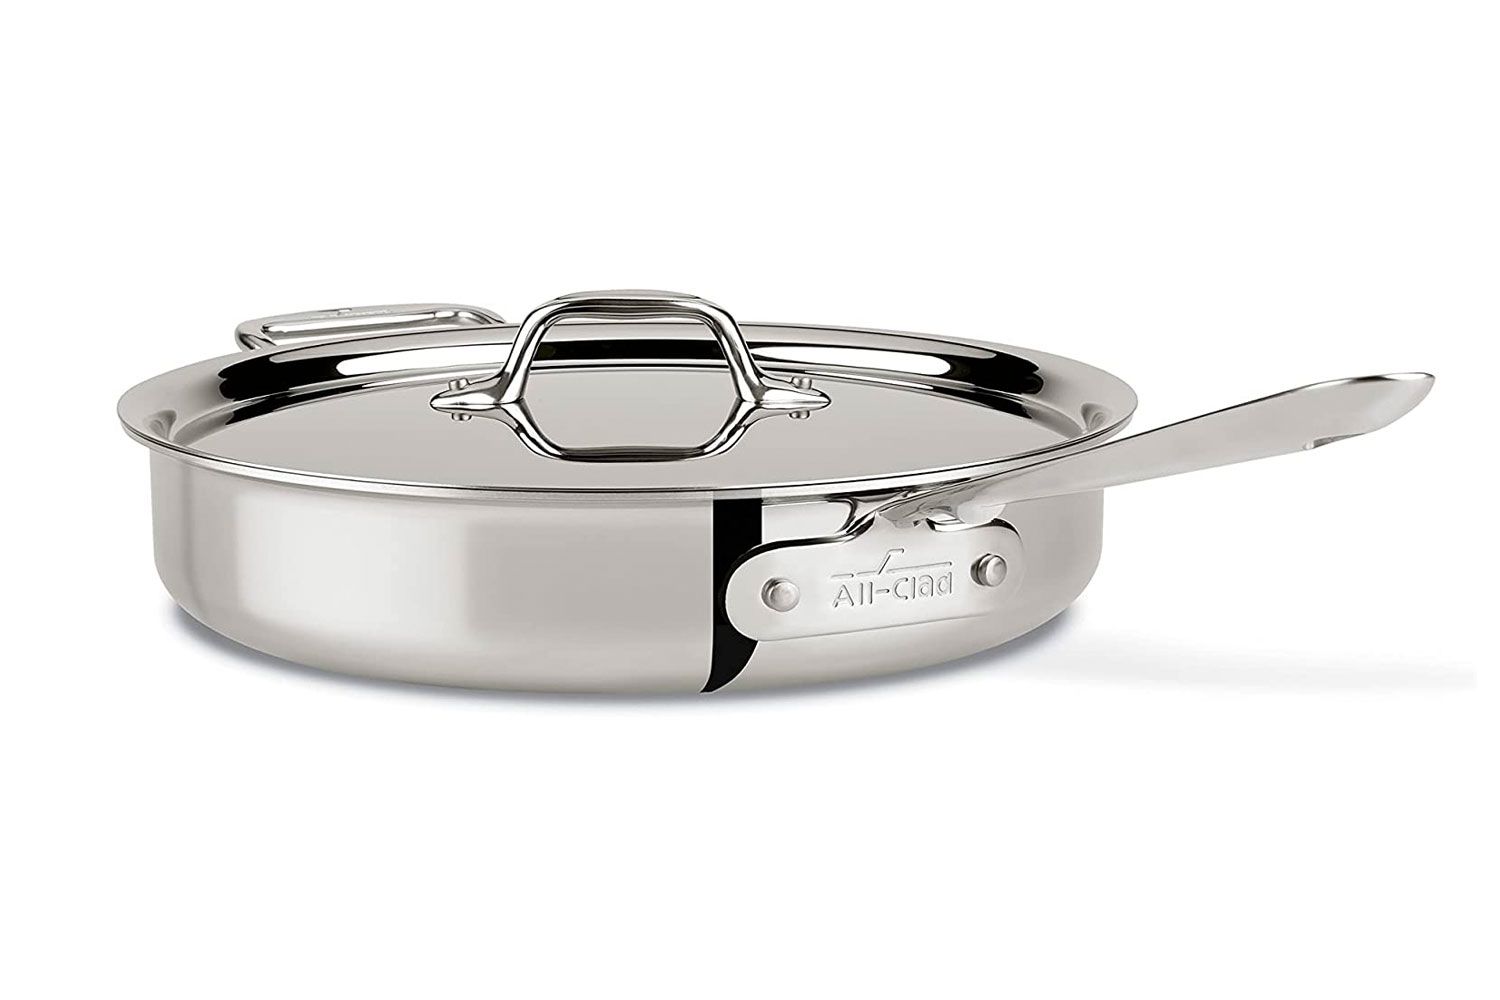 All-Clad D3 3-Ply Stainless Steel SautÃ© Pan with Lid 3 Quart Induction Oven Broil Safe 600F Pots and Pans, Cookware